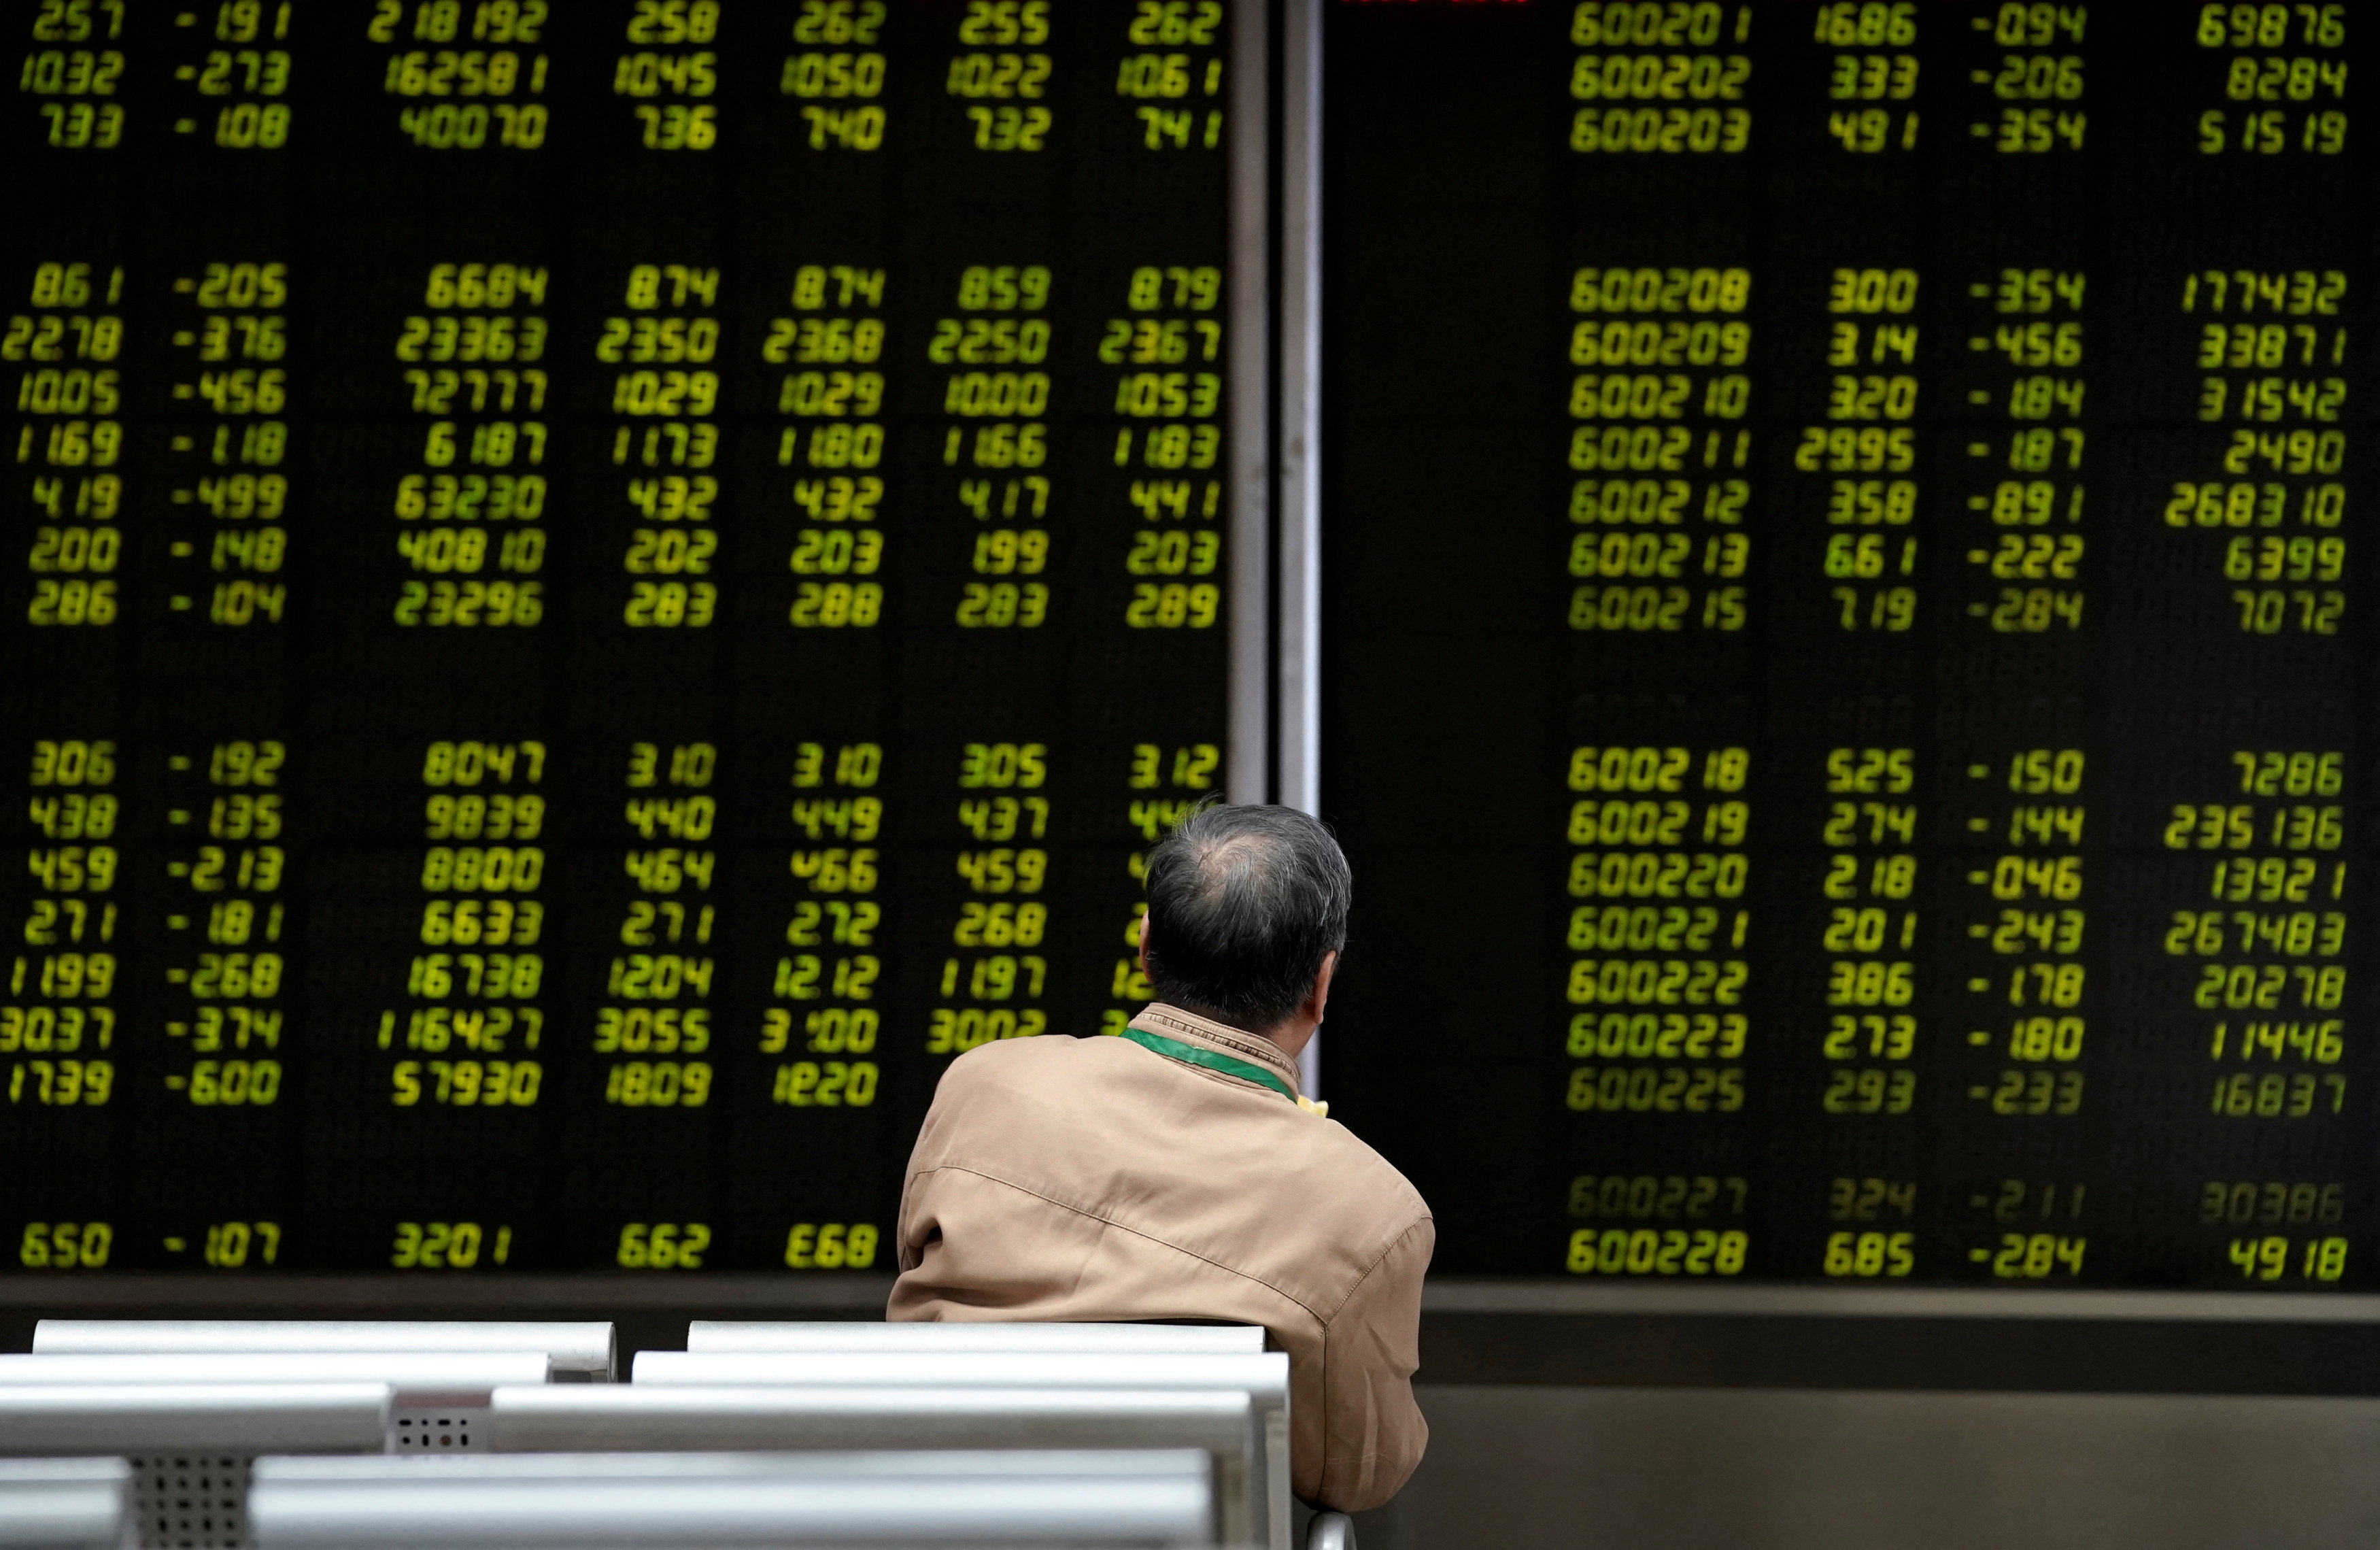 The watchdog has not yet been successful in bolstering the US$9.4 trillion onshore stock market. Photo: Reuters